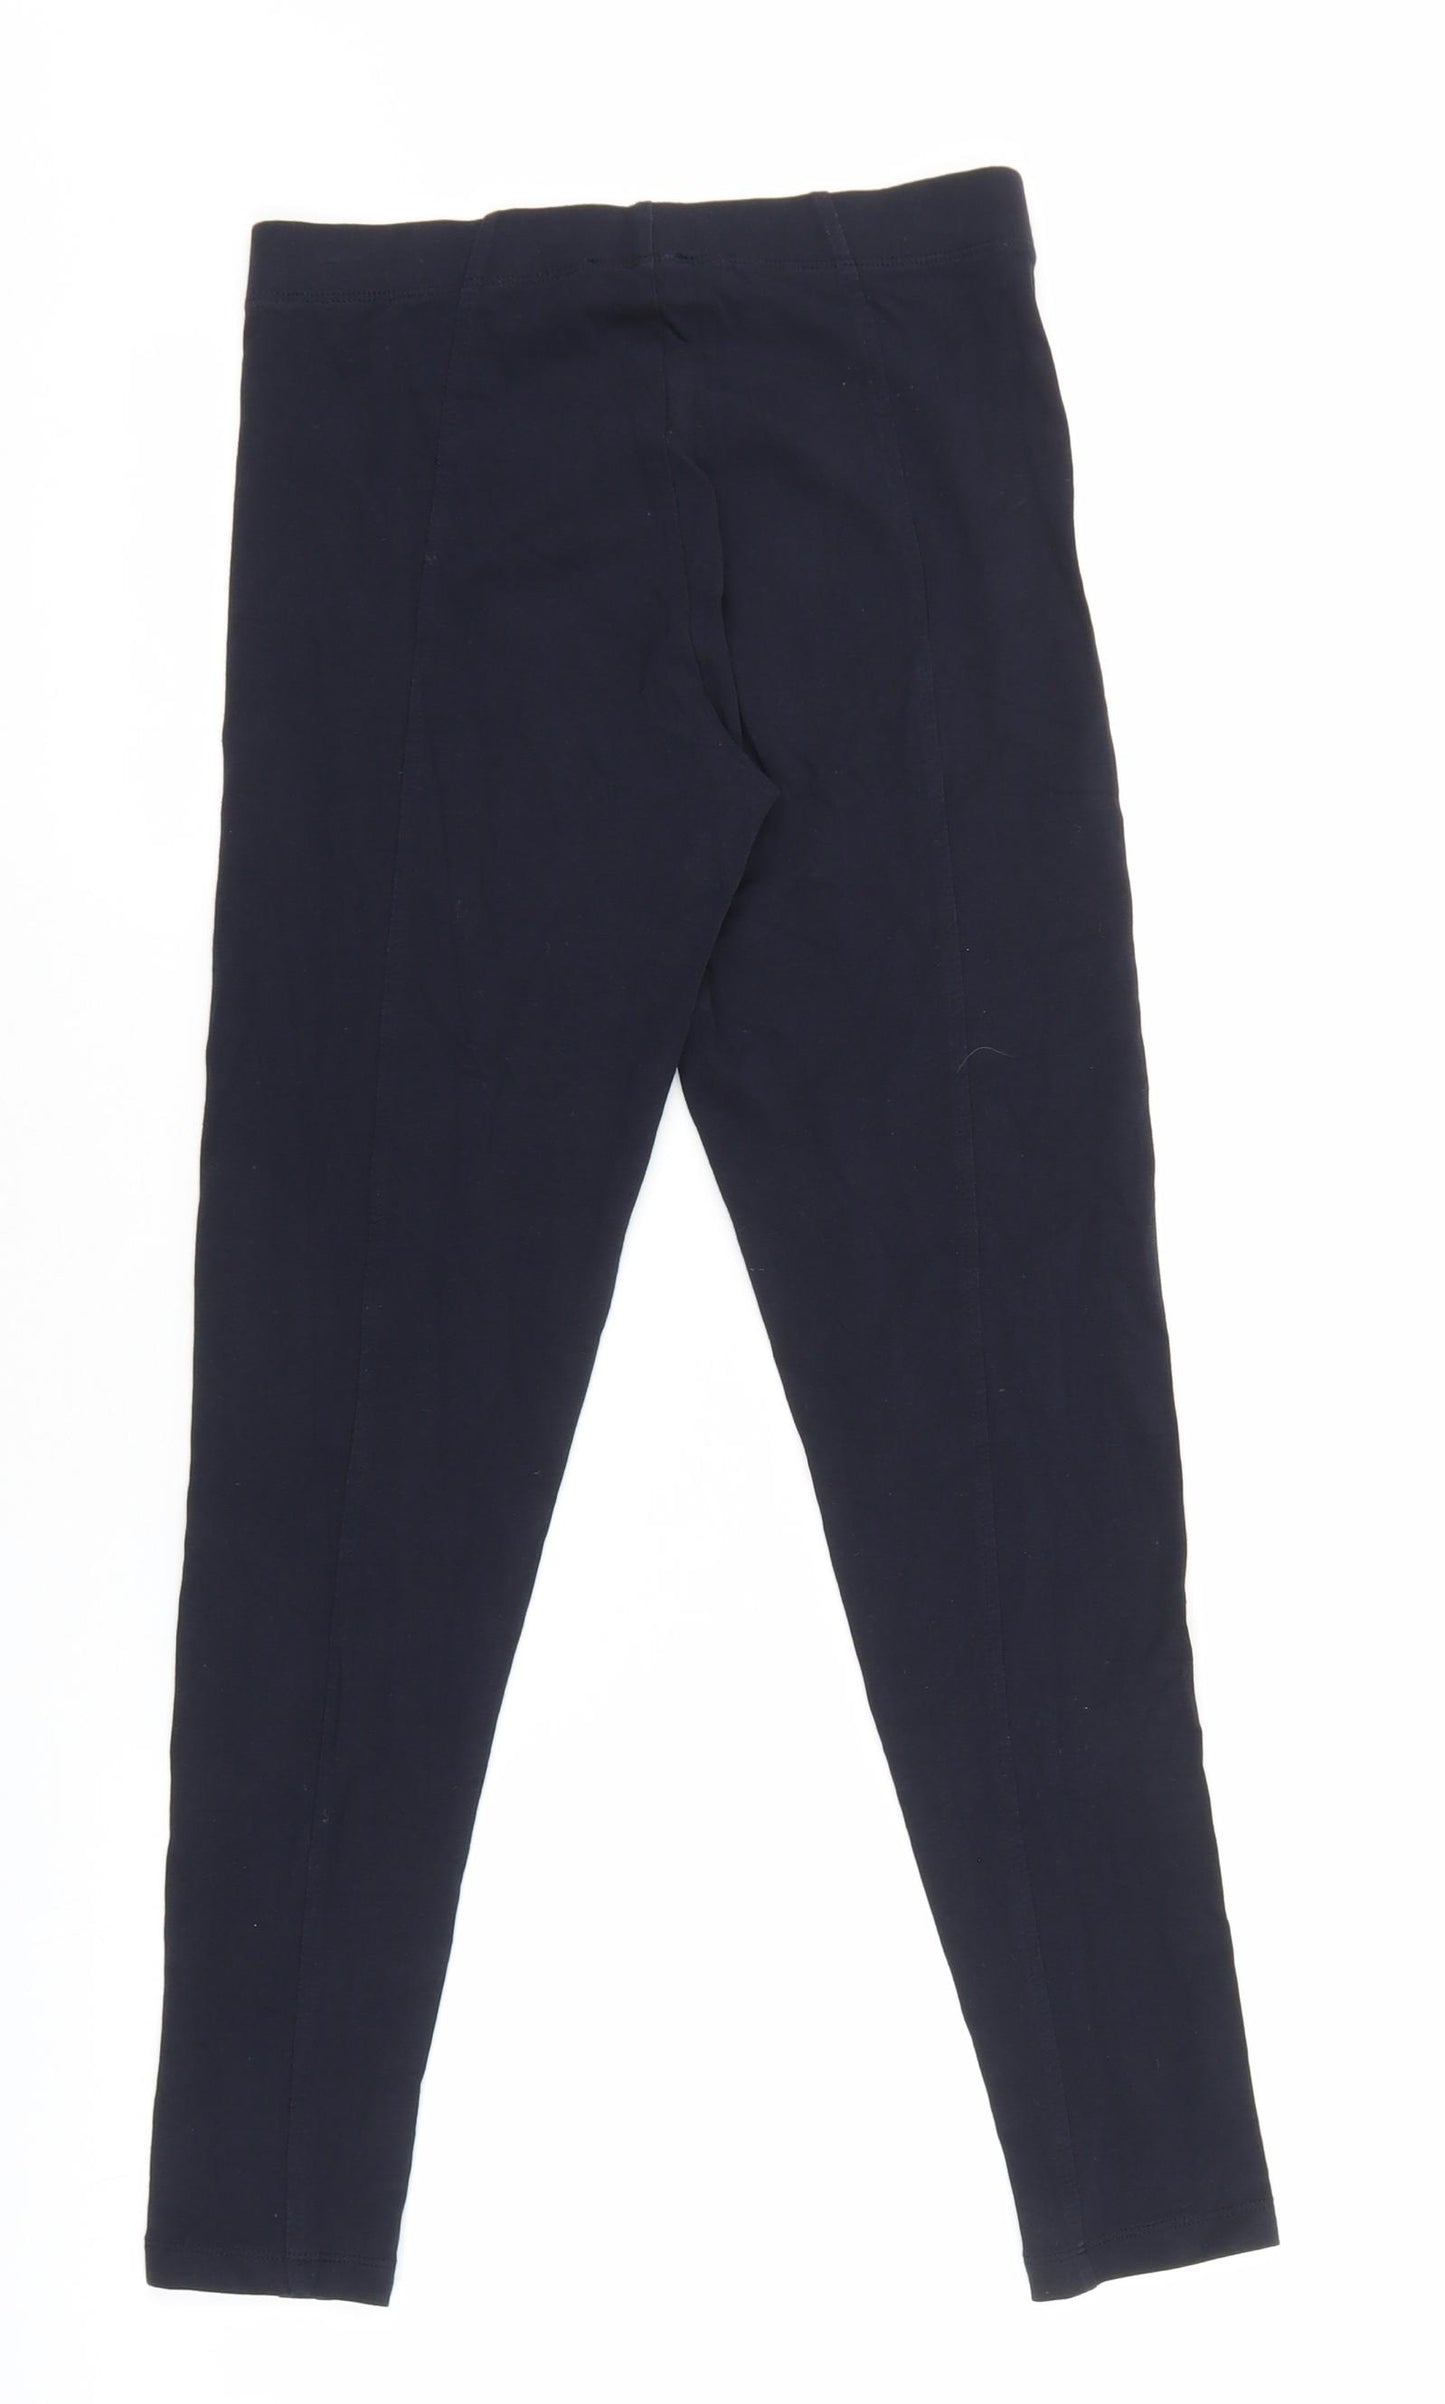 Marks and Spencer Womens Blue Cotton Jogger Leggings Size 10 L25 in